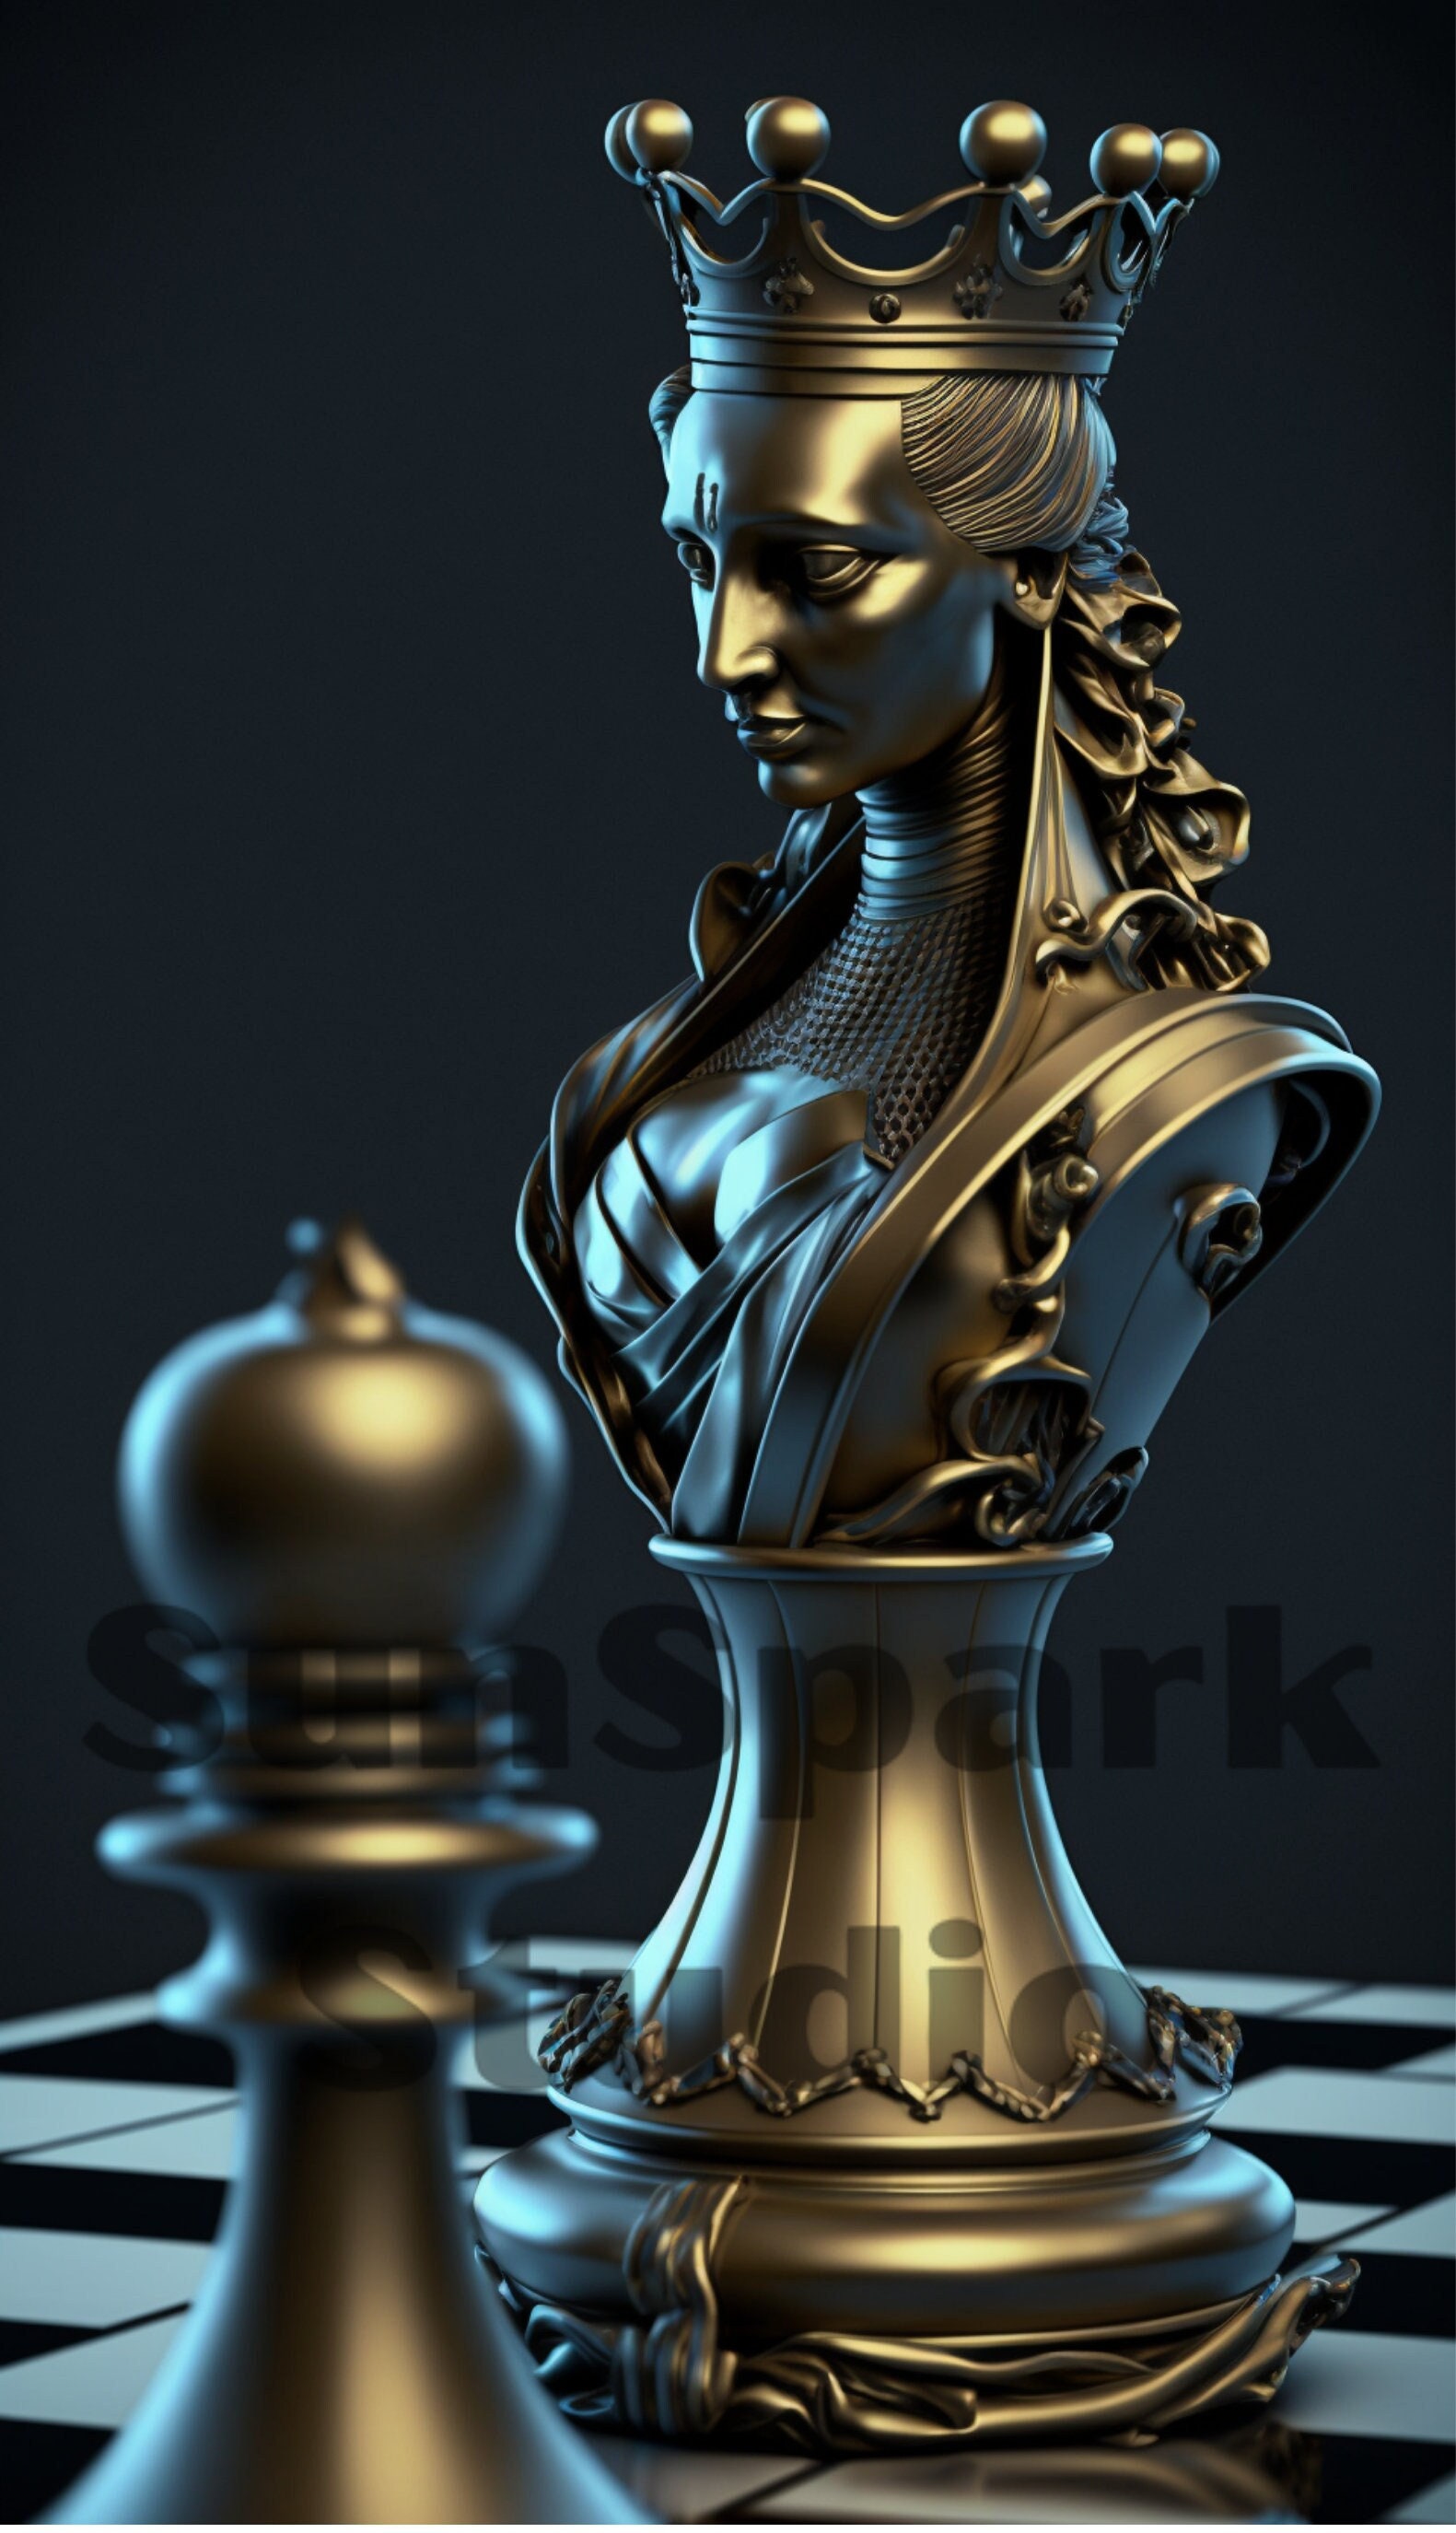 The queen is the most powerful piece - Checkmate De Studio